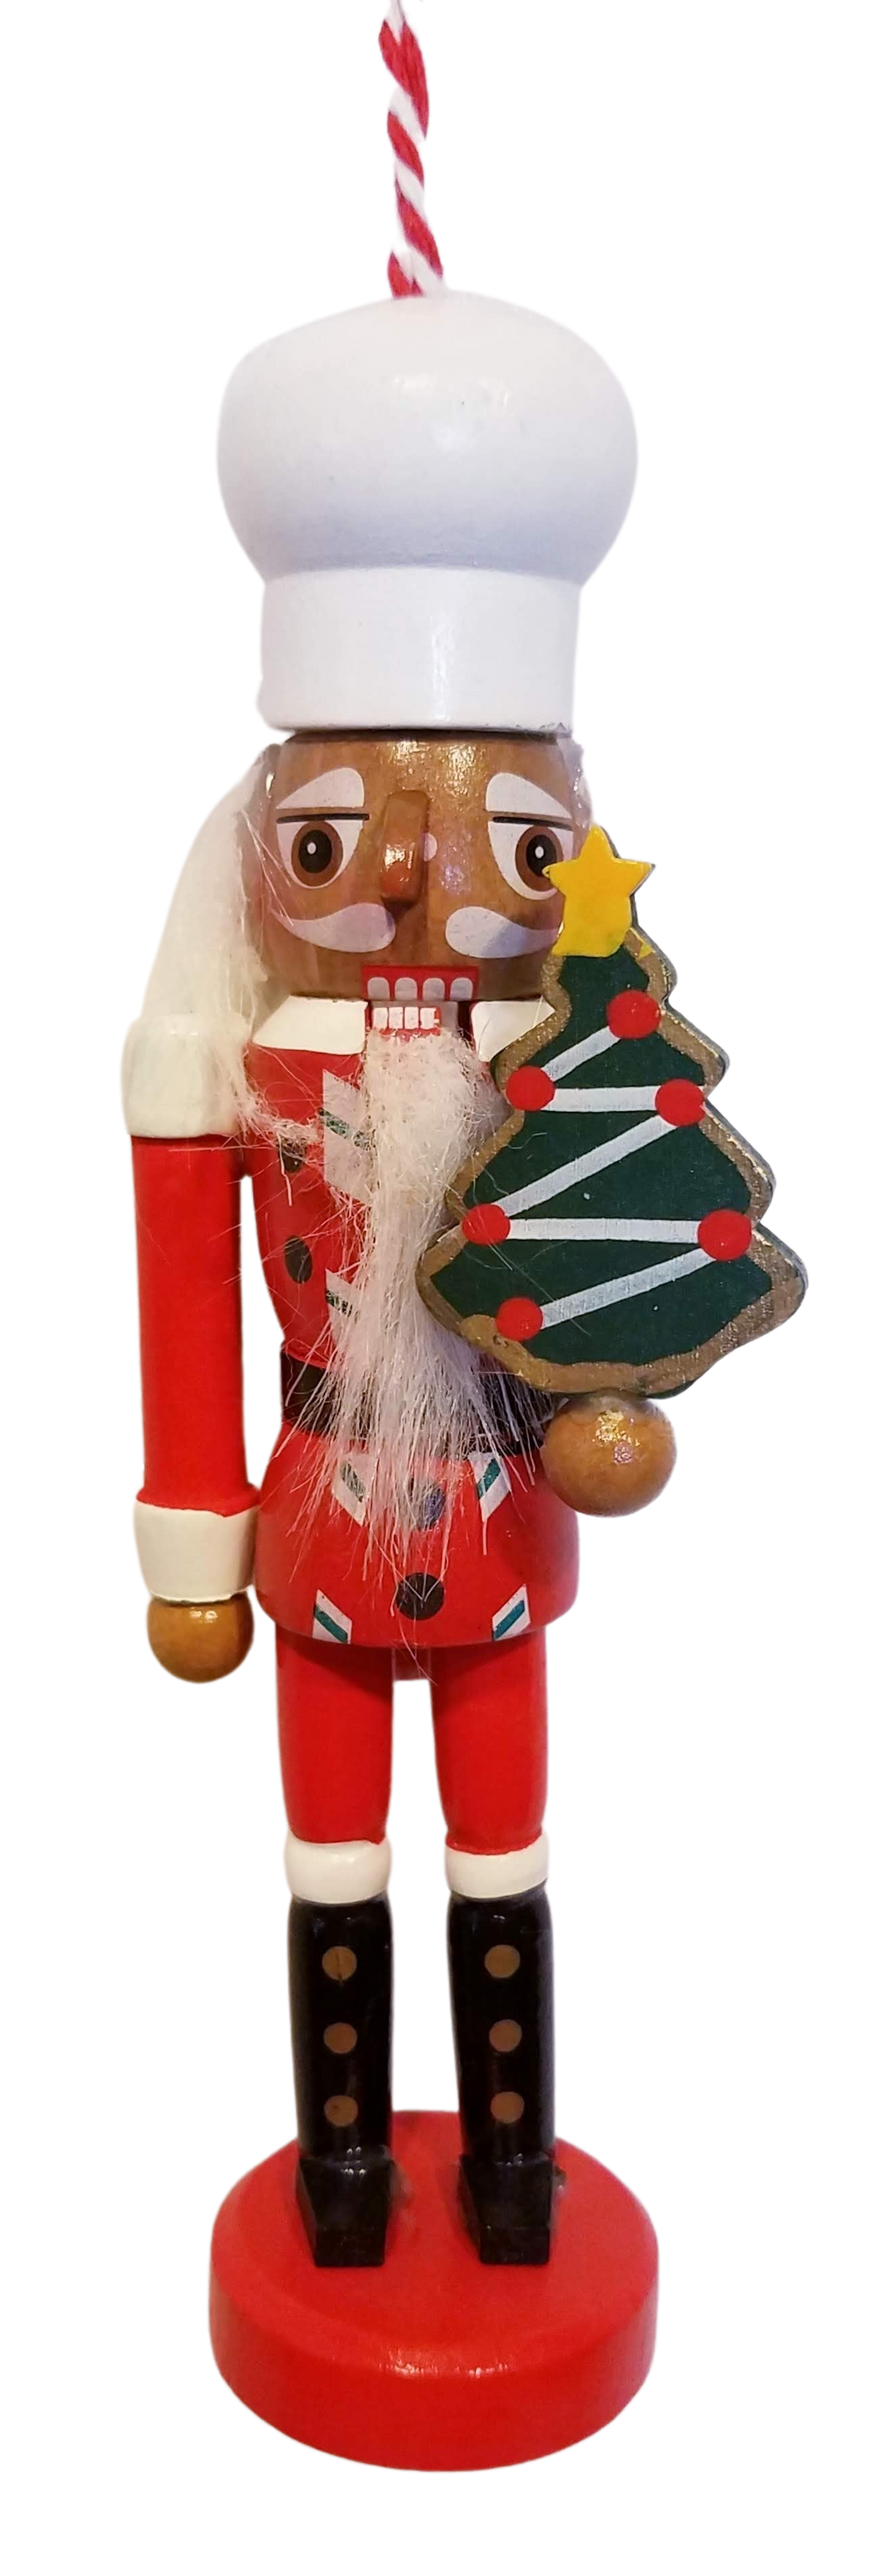 Wooden Gingerbread Chef Nutcracker Ornament Holding Christmas Tree  6